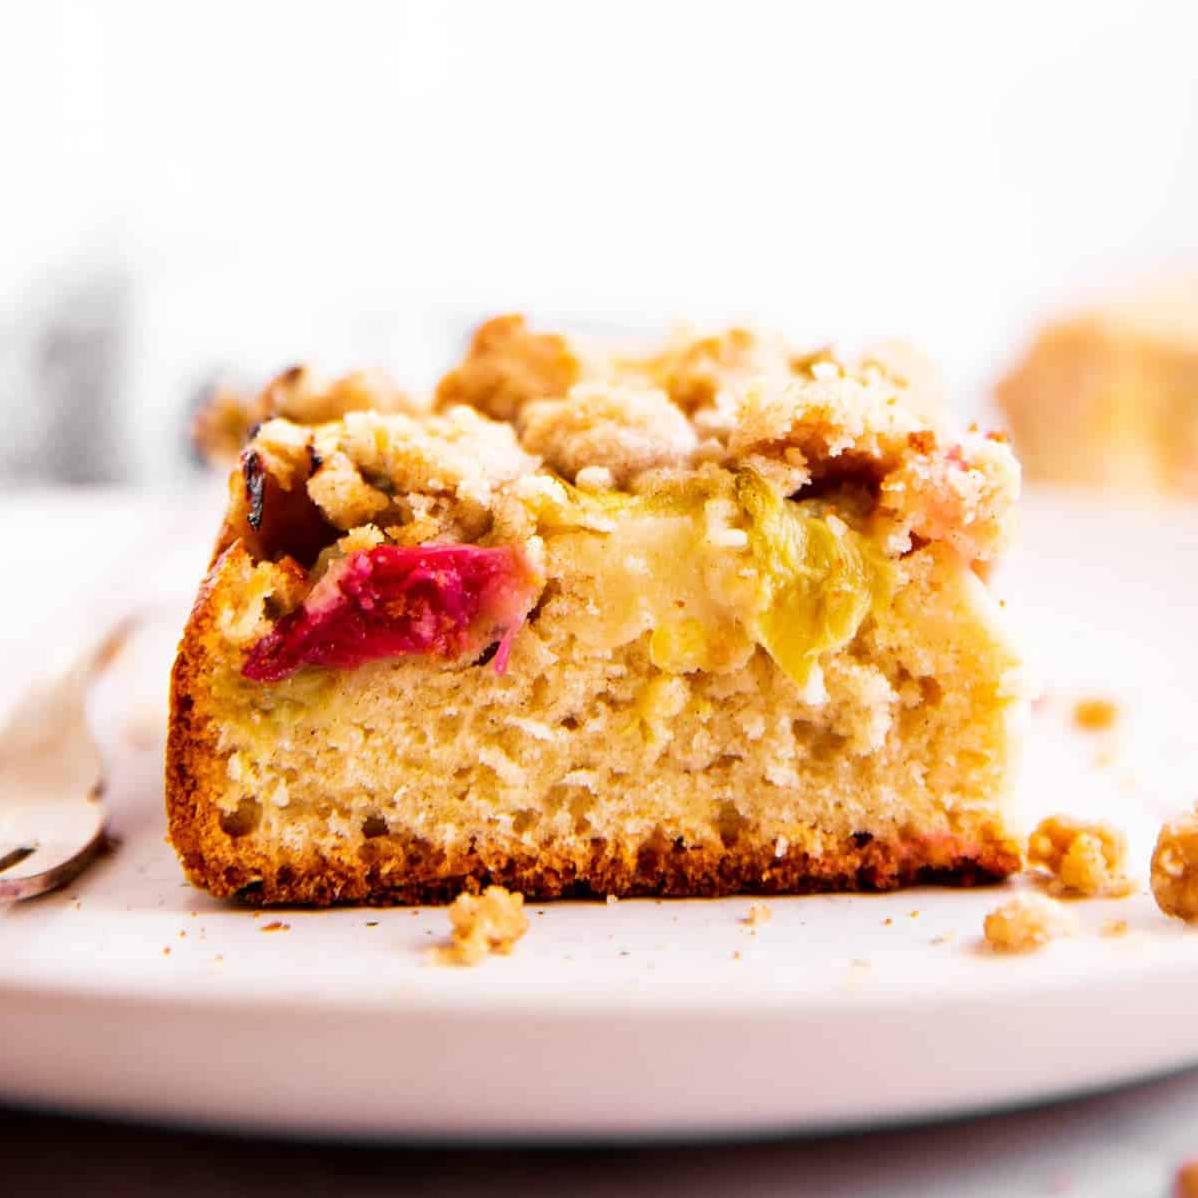  Just when you thought coffee cake couldn't get any better